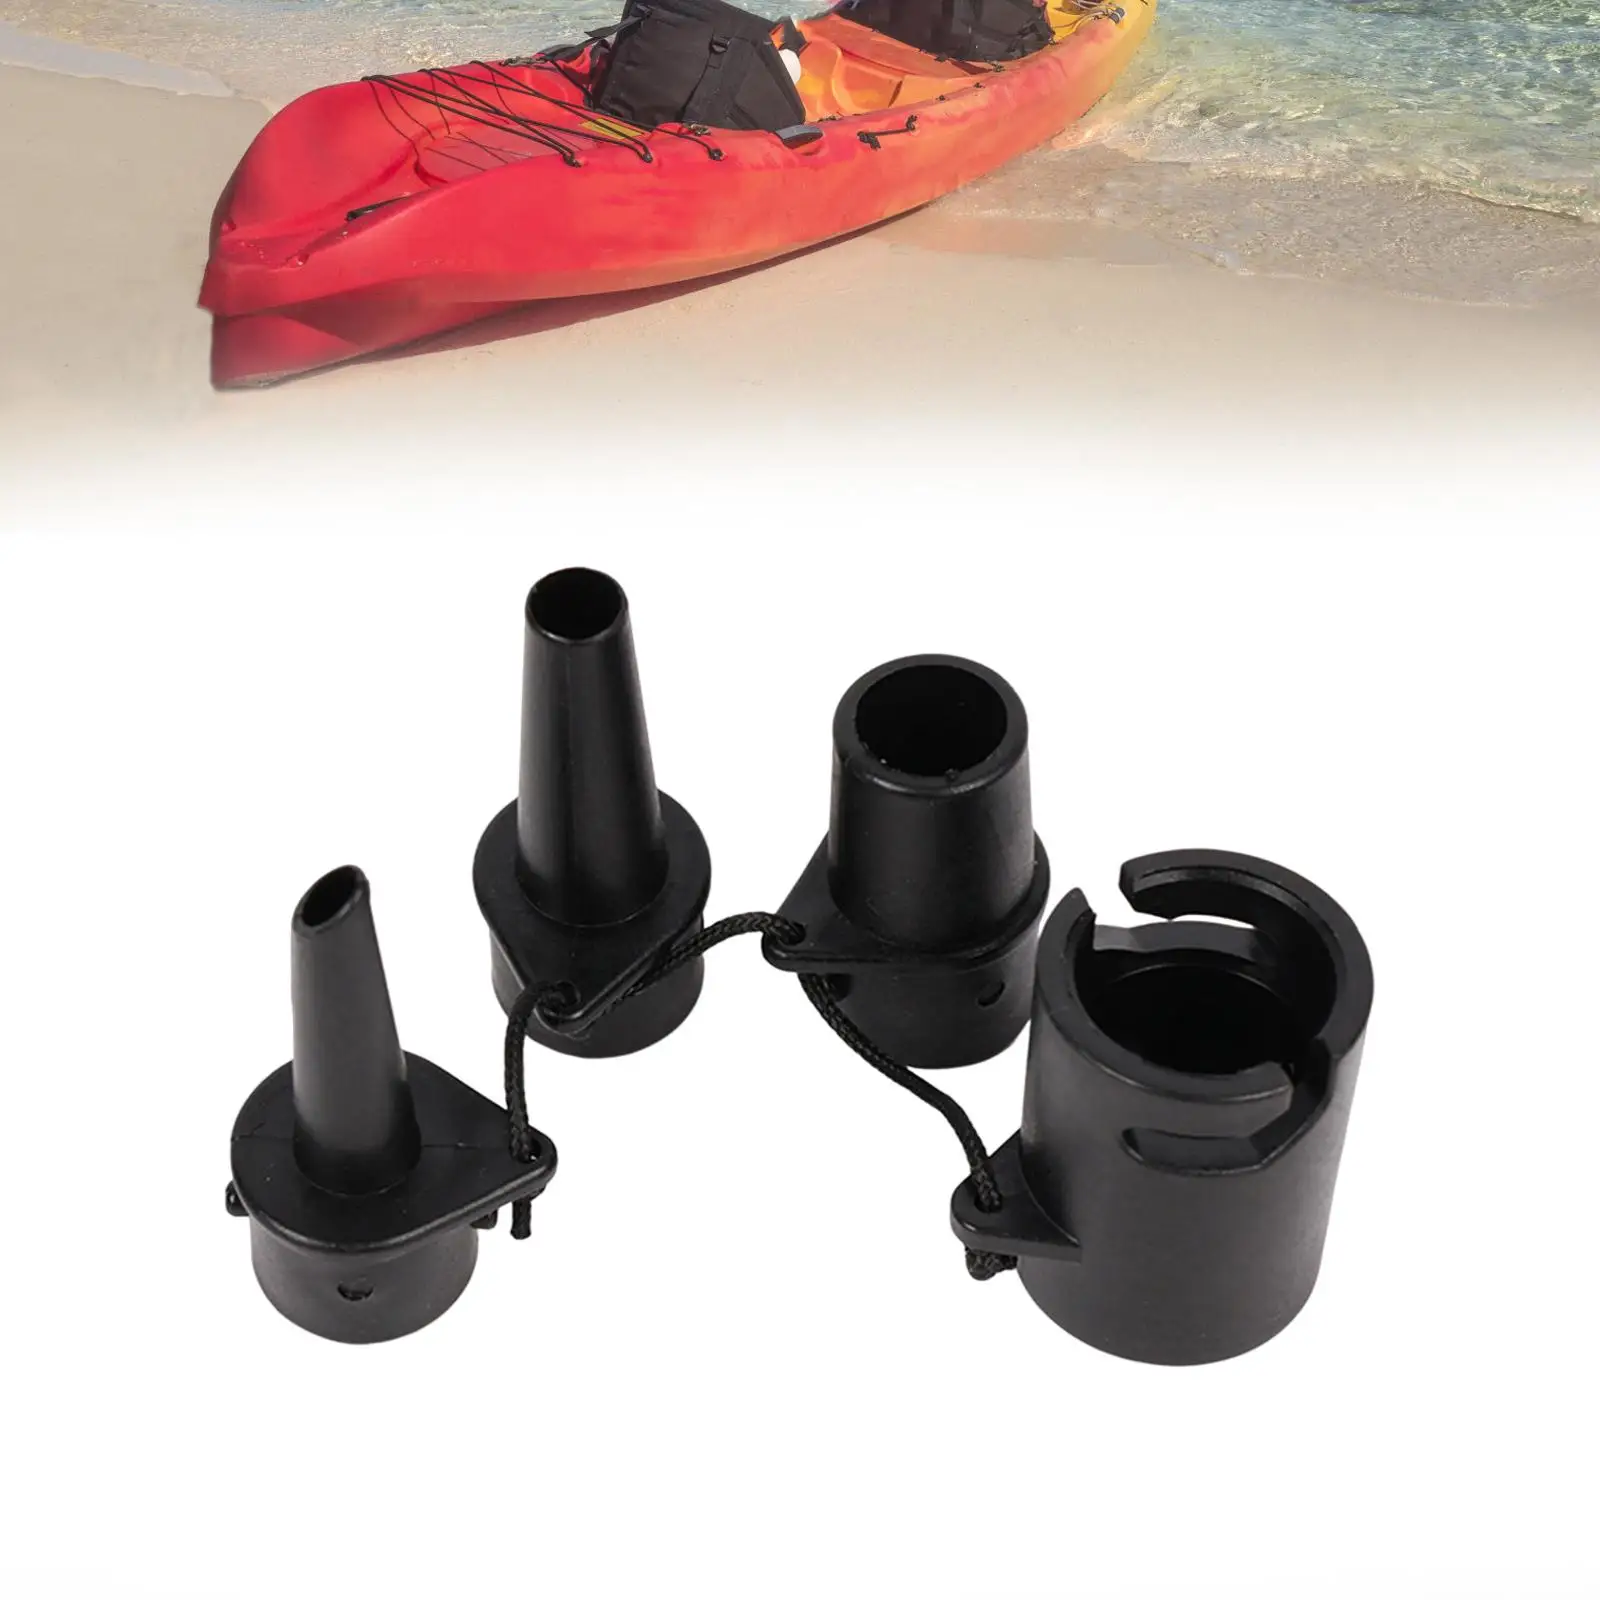 Air Valve Adapter Lightweight Durable SUP Pump Adapter for Floating Rows Boat Kayak Board Inflatable Bed